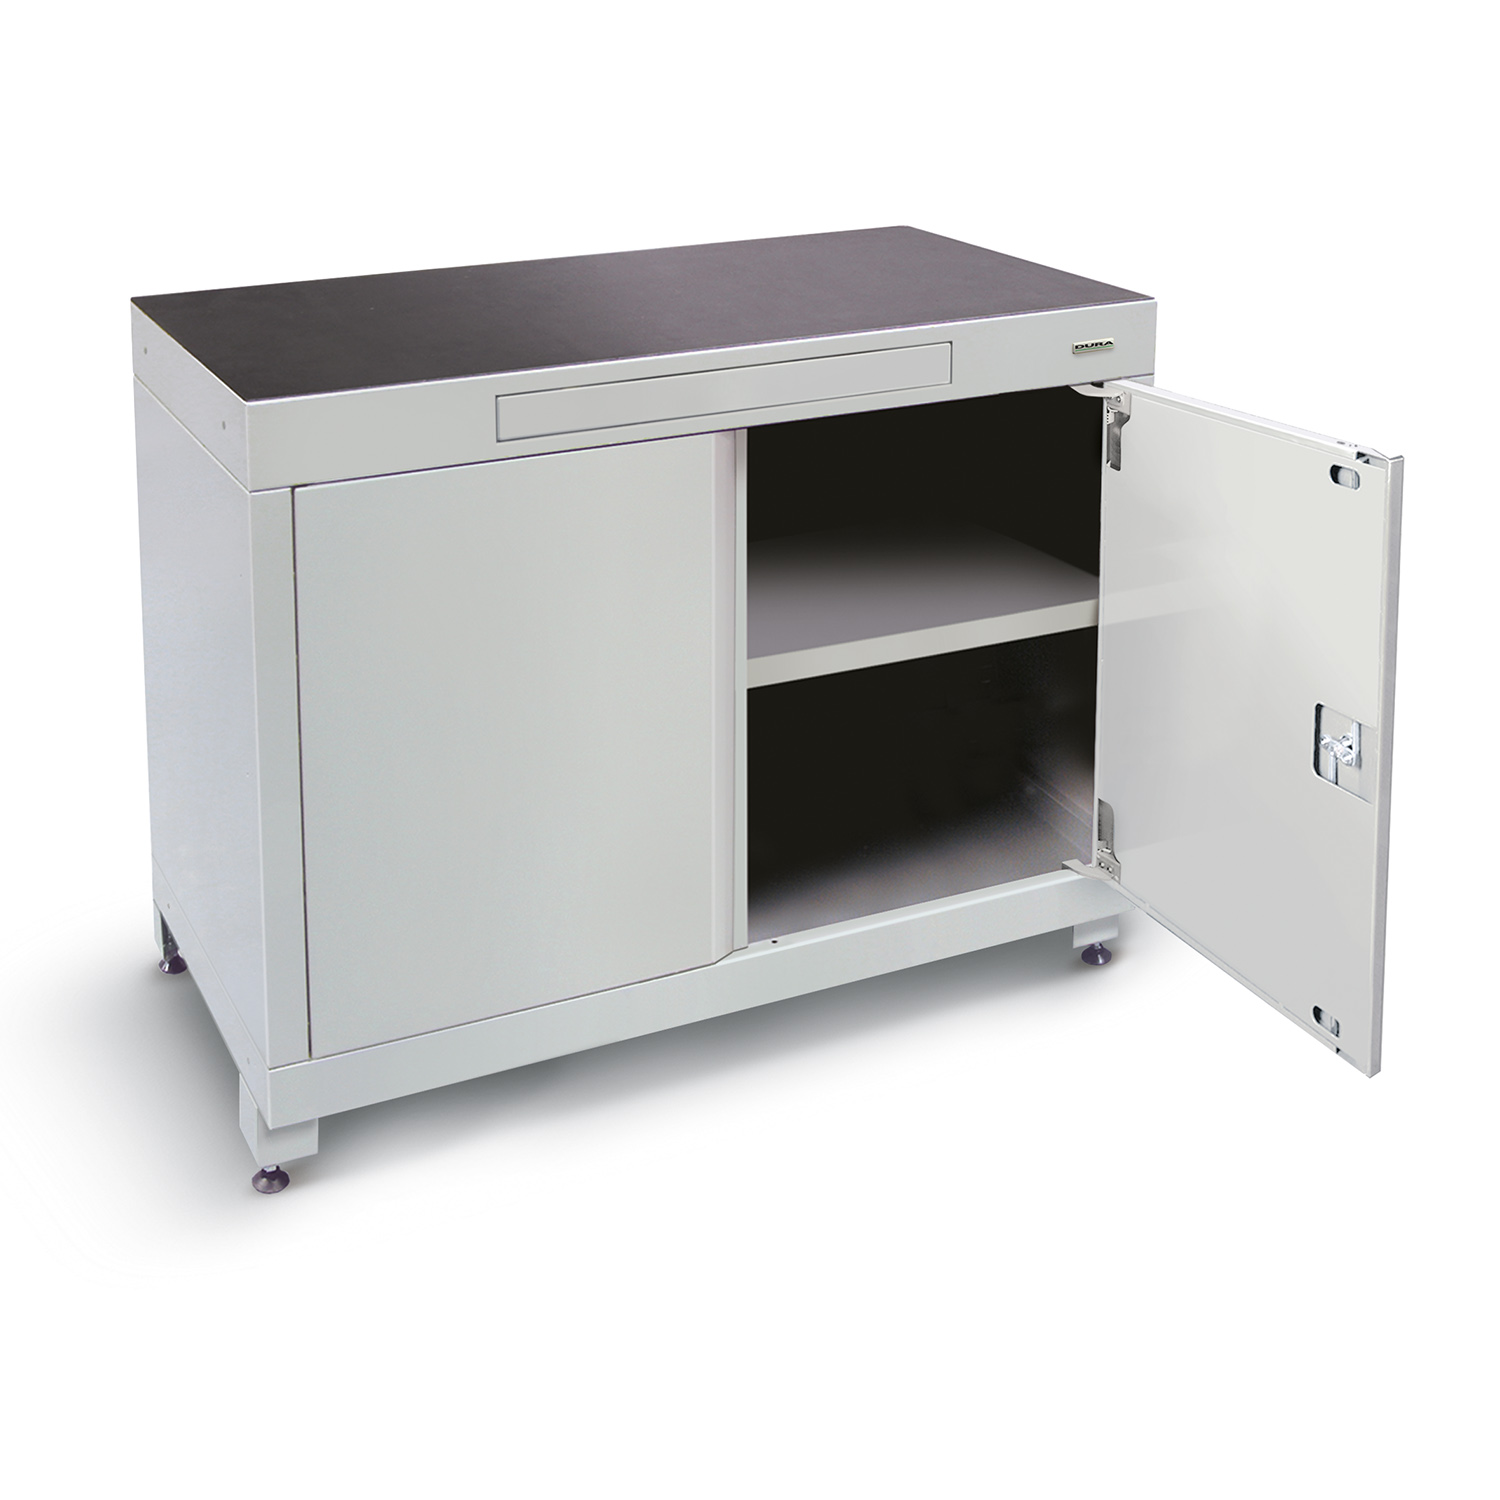 1200mm wide base cabinet with drawer (double hinged doors/feet)